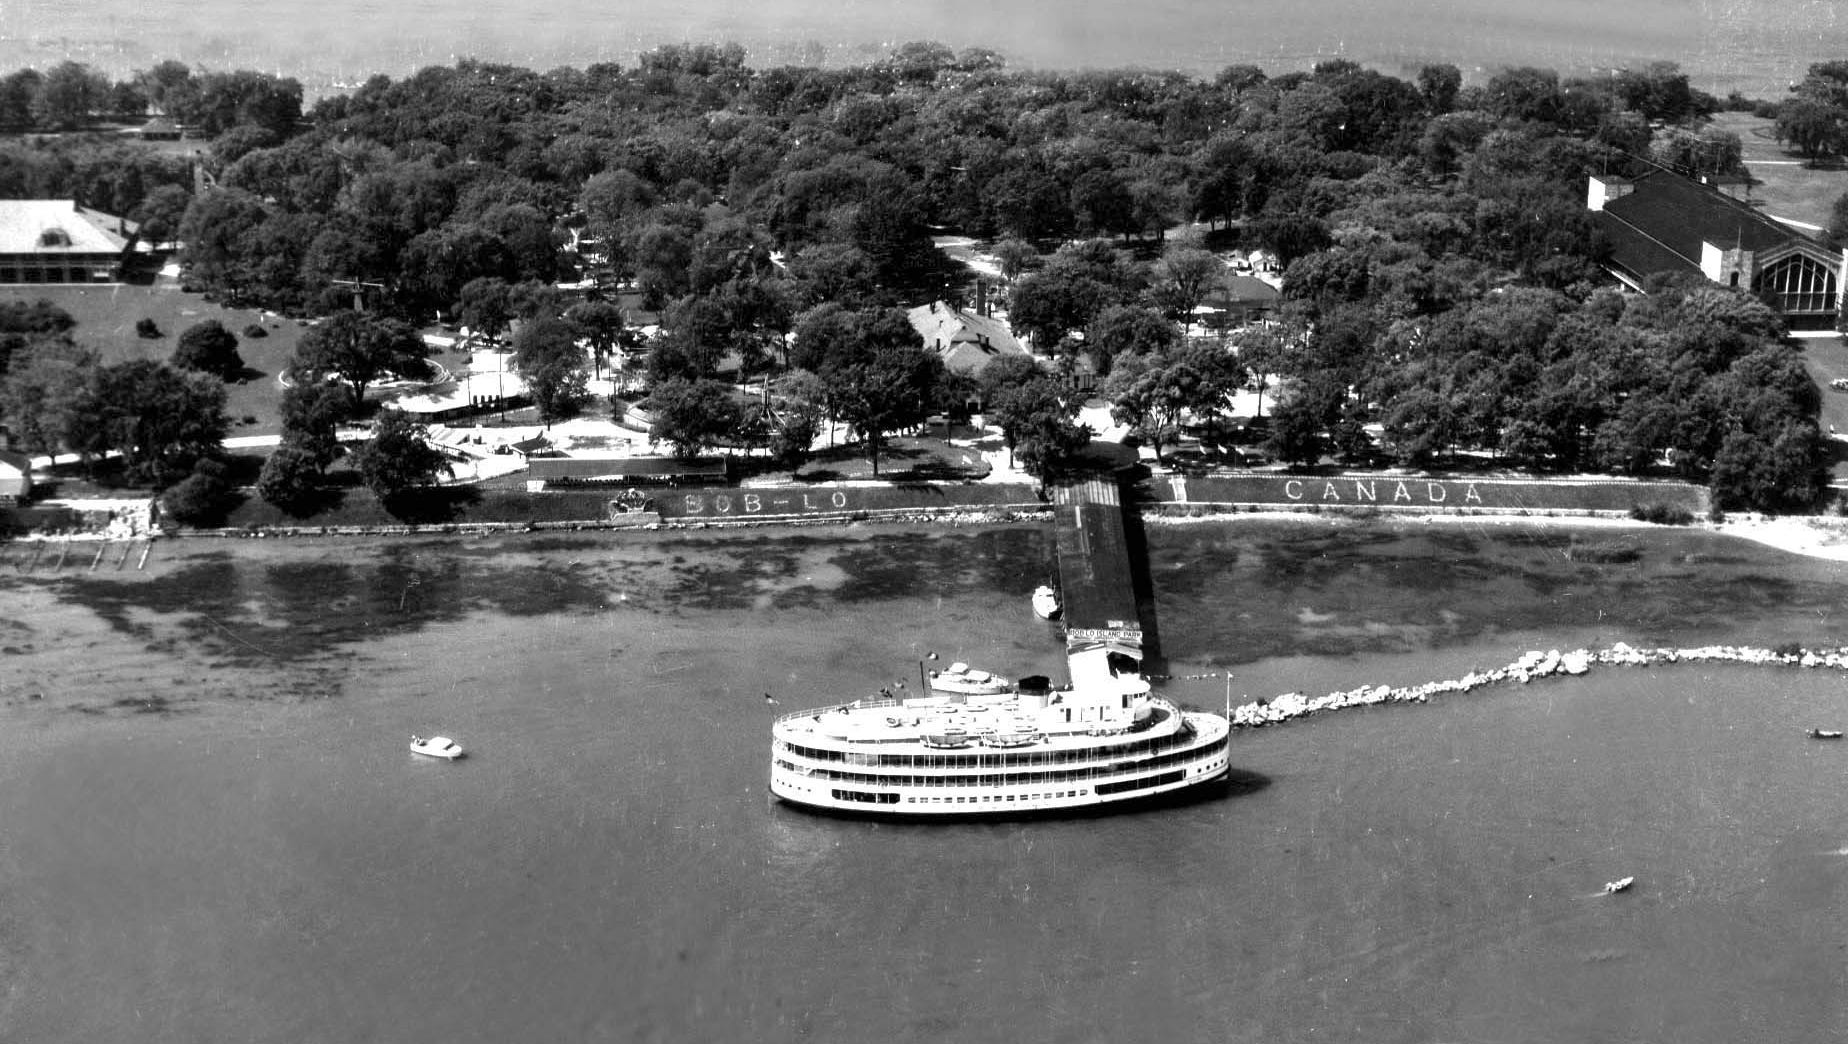 Aerial view of a Boblo boat.